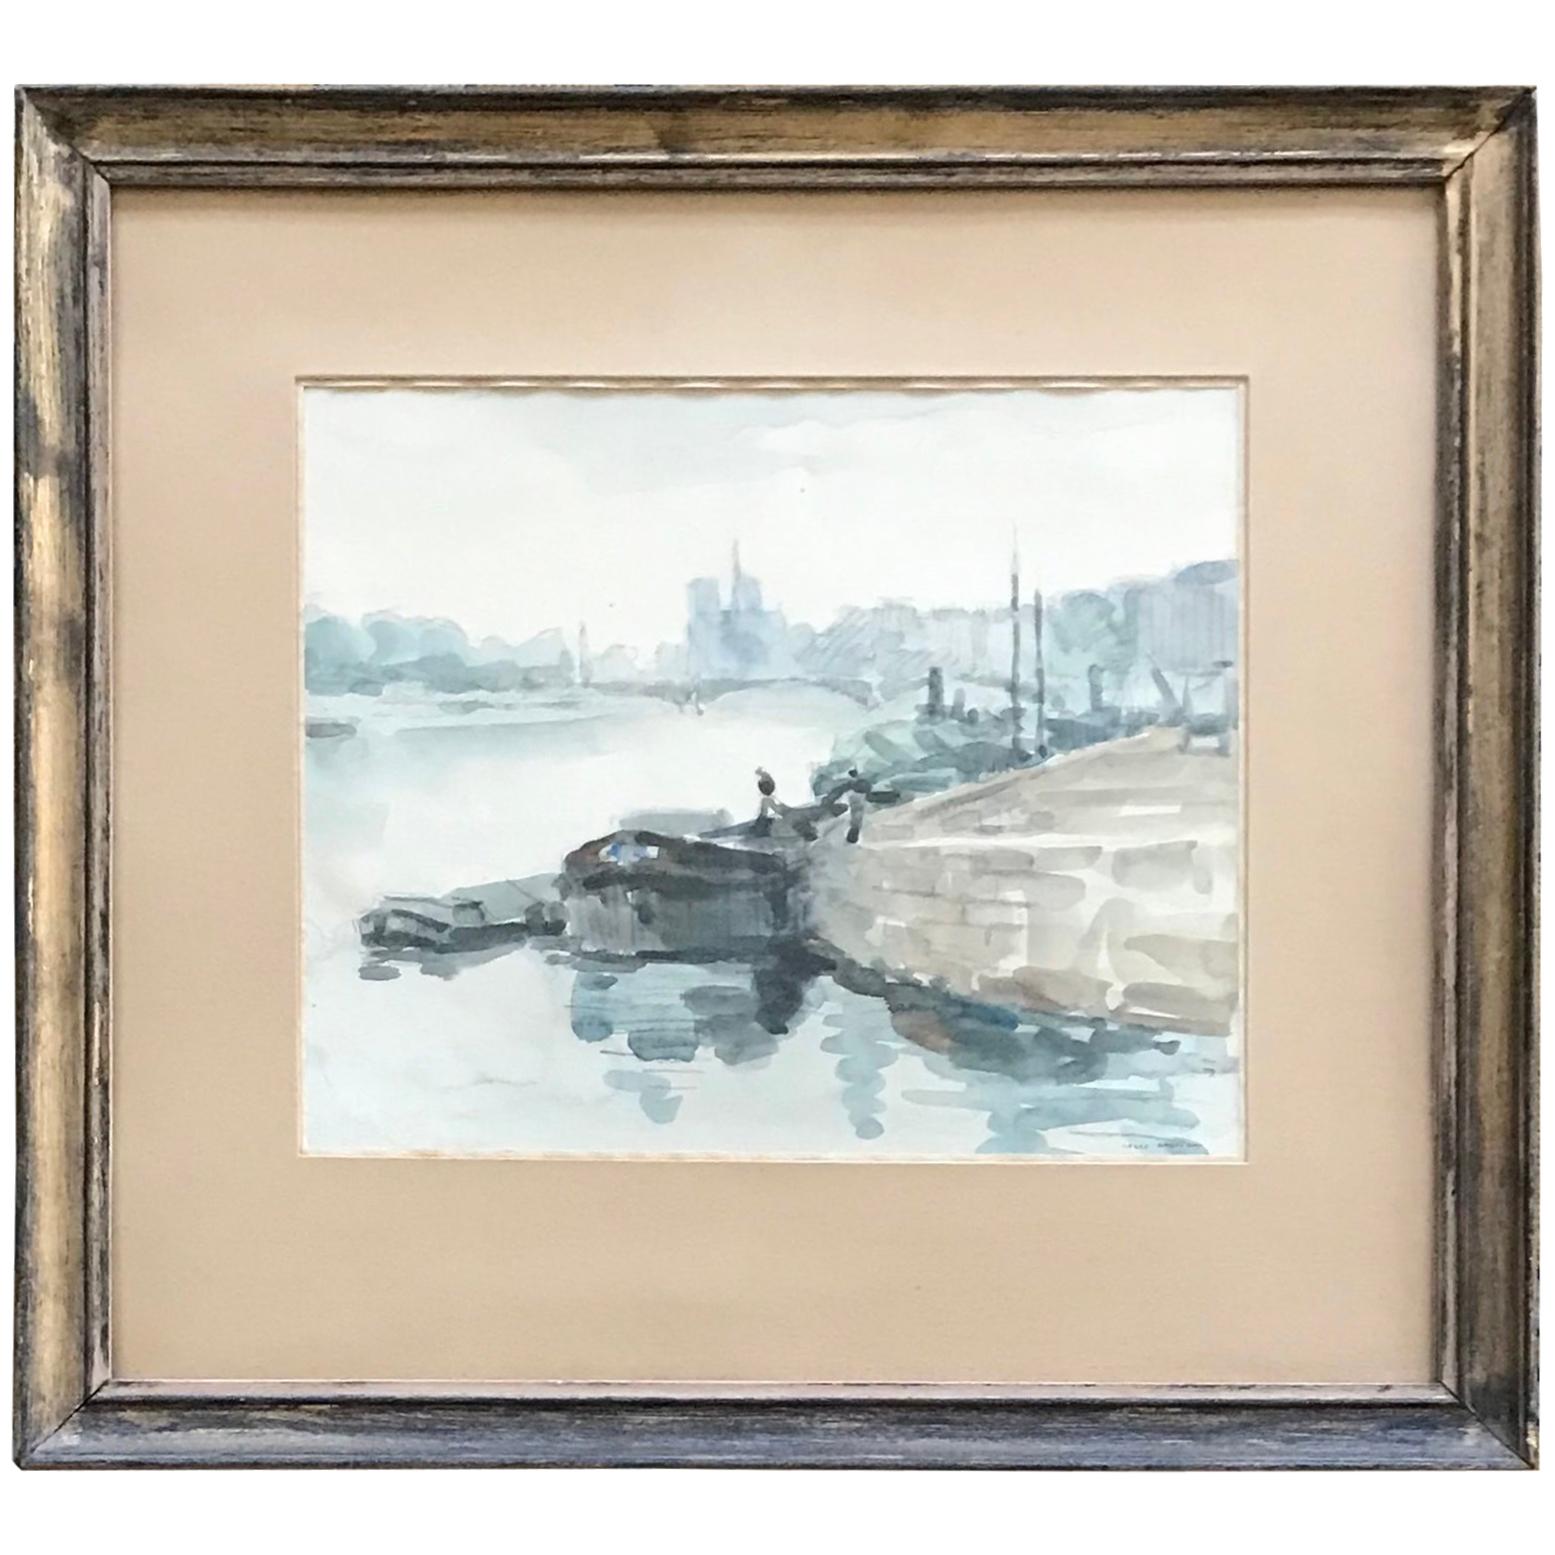 Pierre Bordeaux, Paris View of the Seine, 1934. Vintage April in Paris ambience to this hand-painted watercolour rendered in soft blue, grey, celadon and buff tones of the Port Henri on the Seine, just down from the Pont Henri and Notre Dame. By